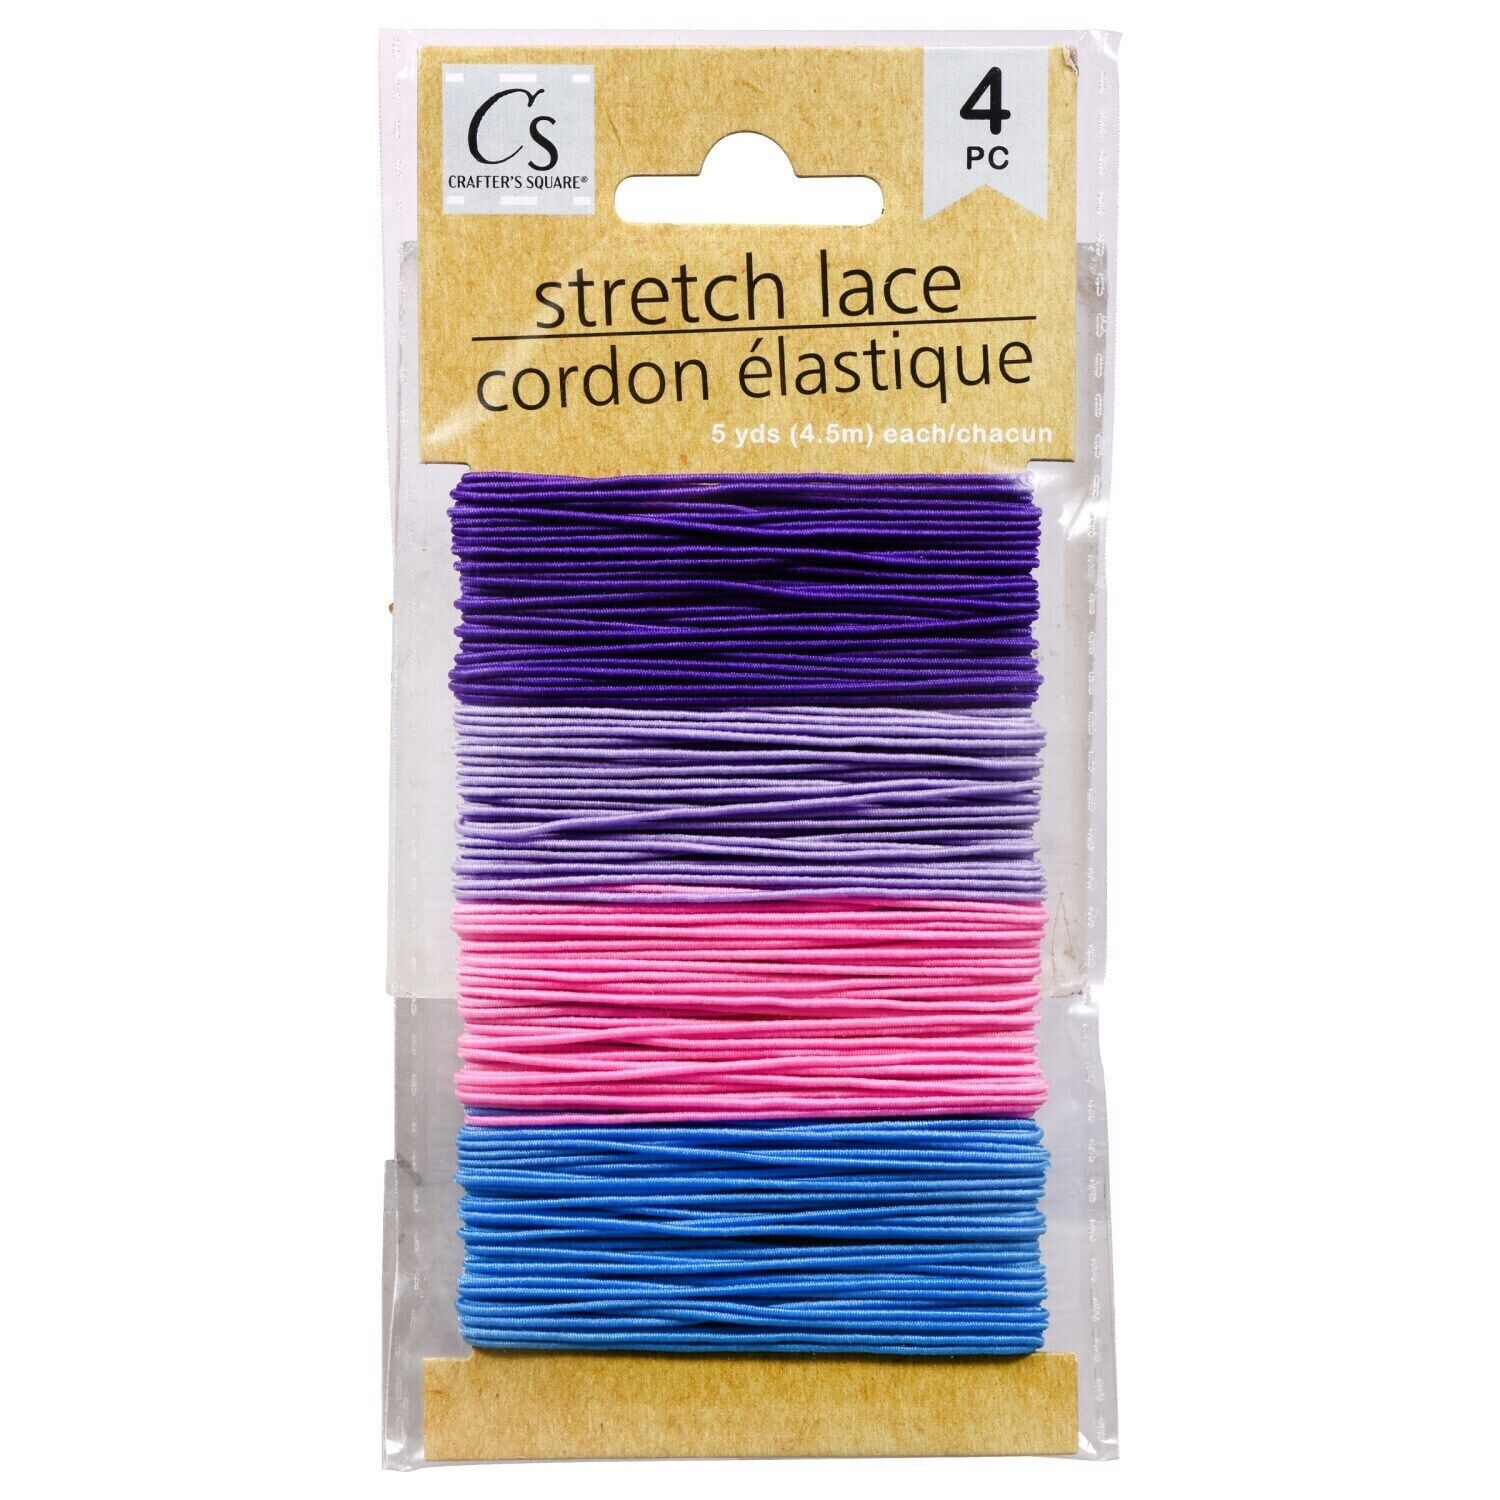 Crafter's Square Stretch Lace, 5 Yd. Rolls (pack Of 4)